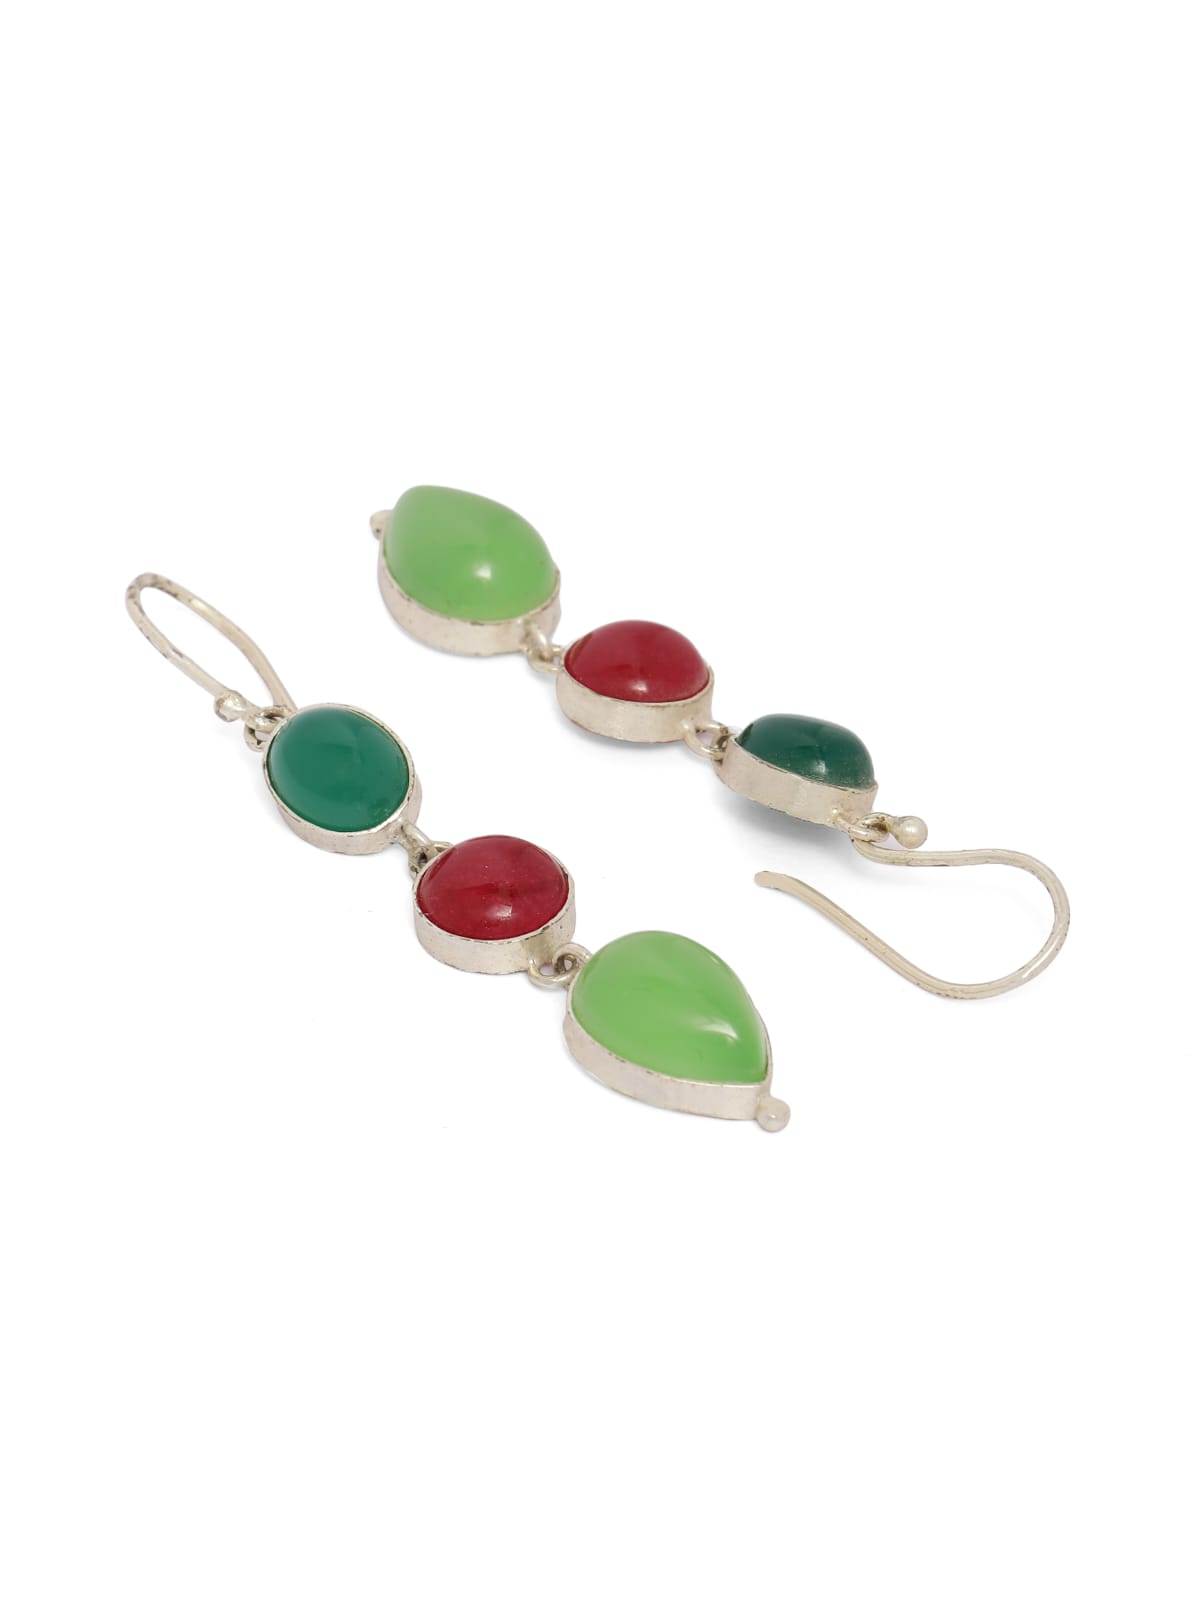 Sterling Silver hook earrings with double green Onyx, red Quartz and grapes Aventurine.